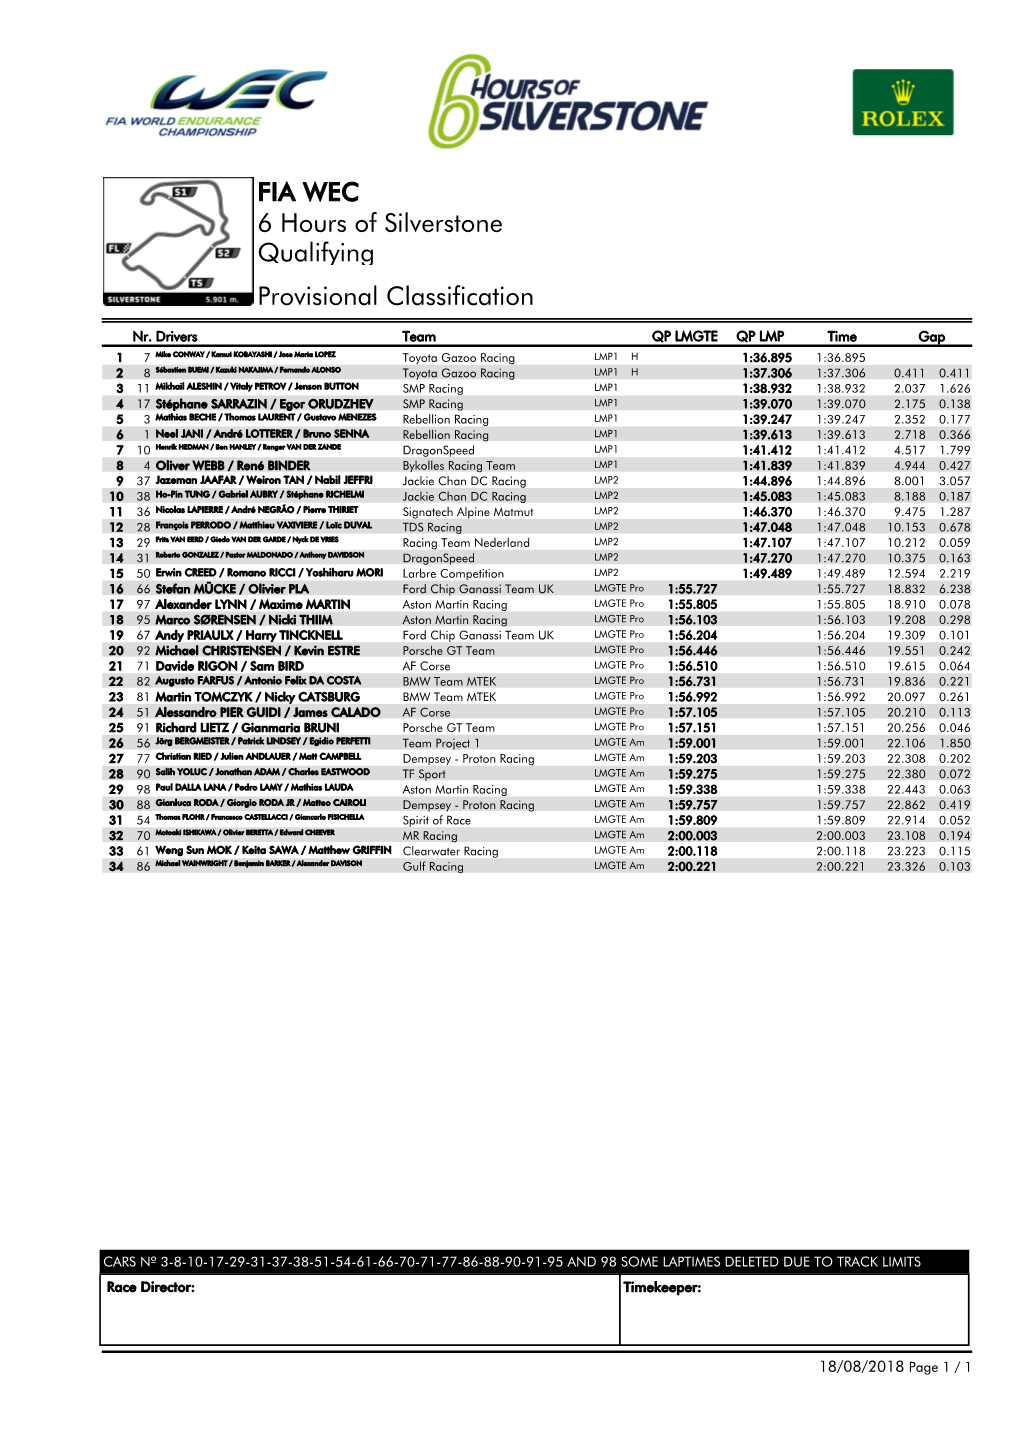 FIA WEC 6 Hours of Silverstone Qualifying Provisional Classification